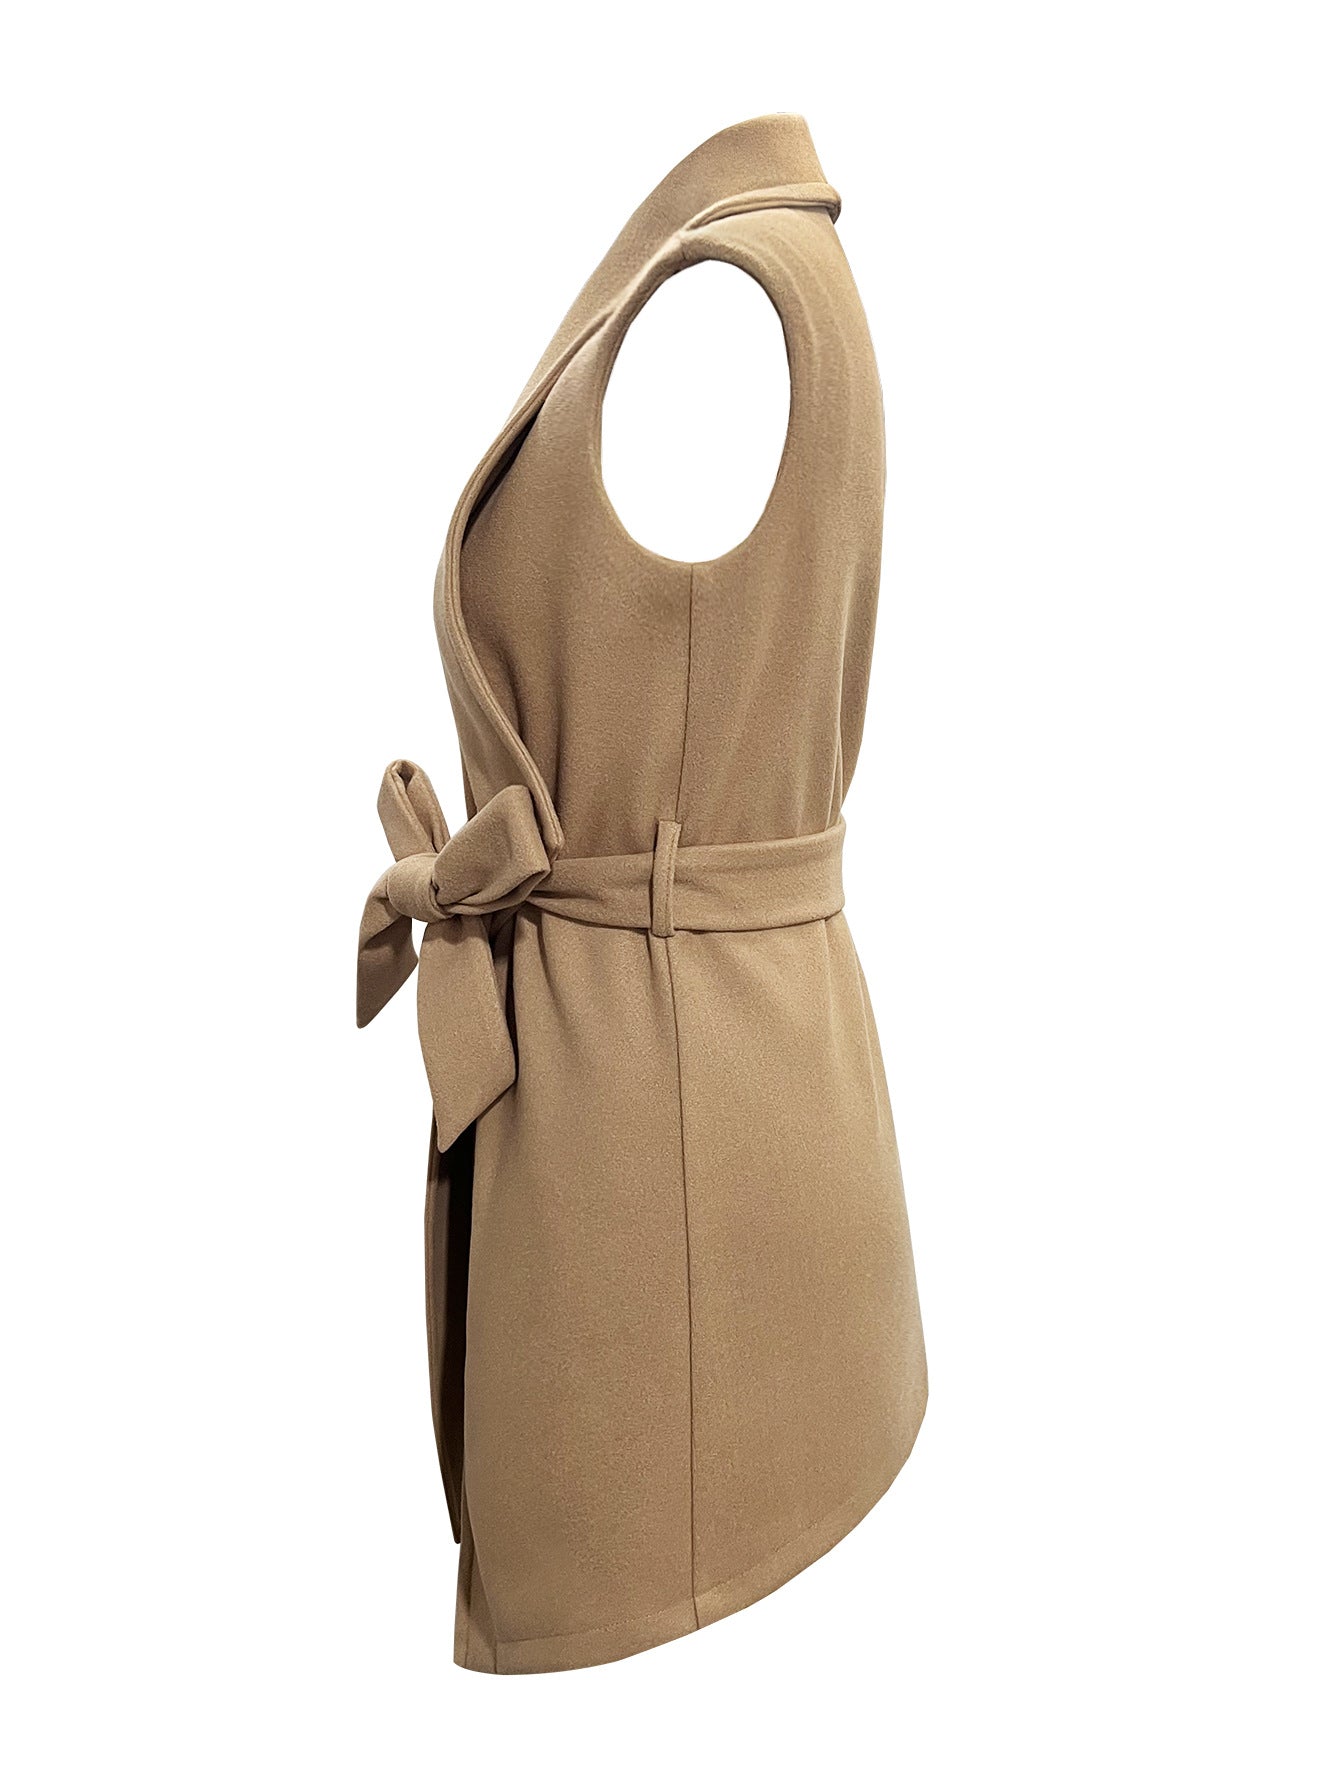 Sleeveless Wool Coat in a Solid Color for a Chic Look